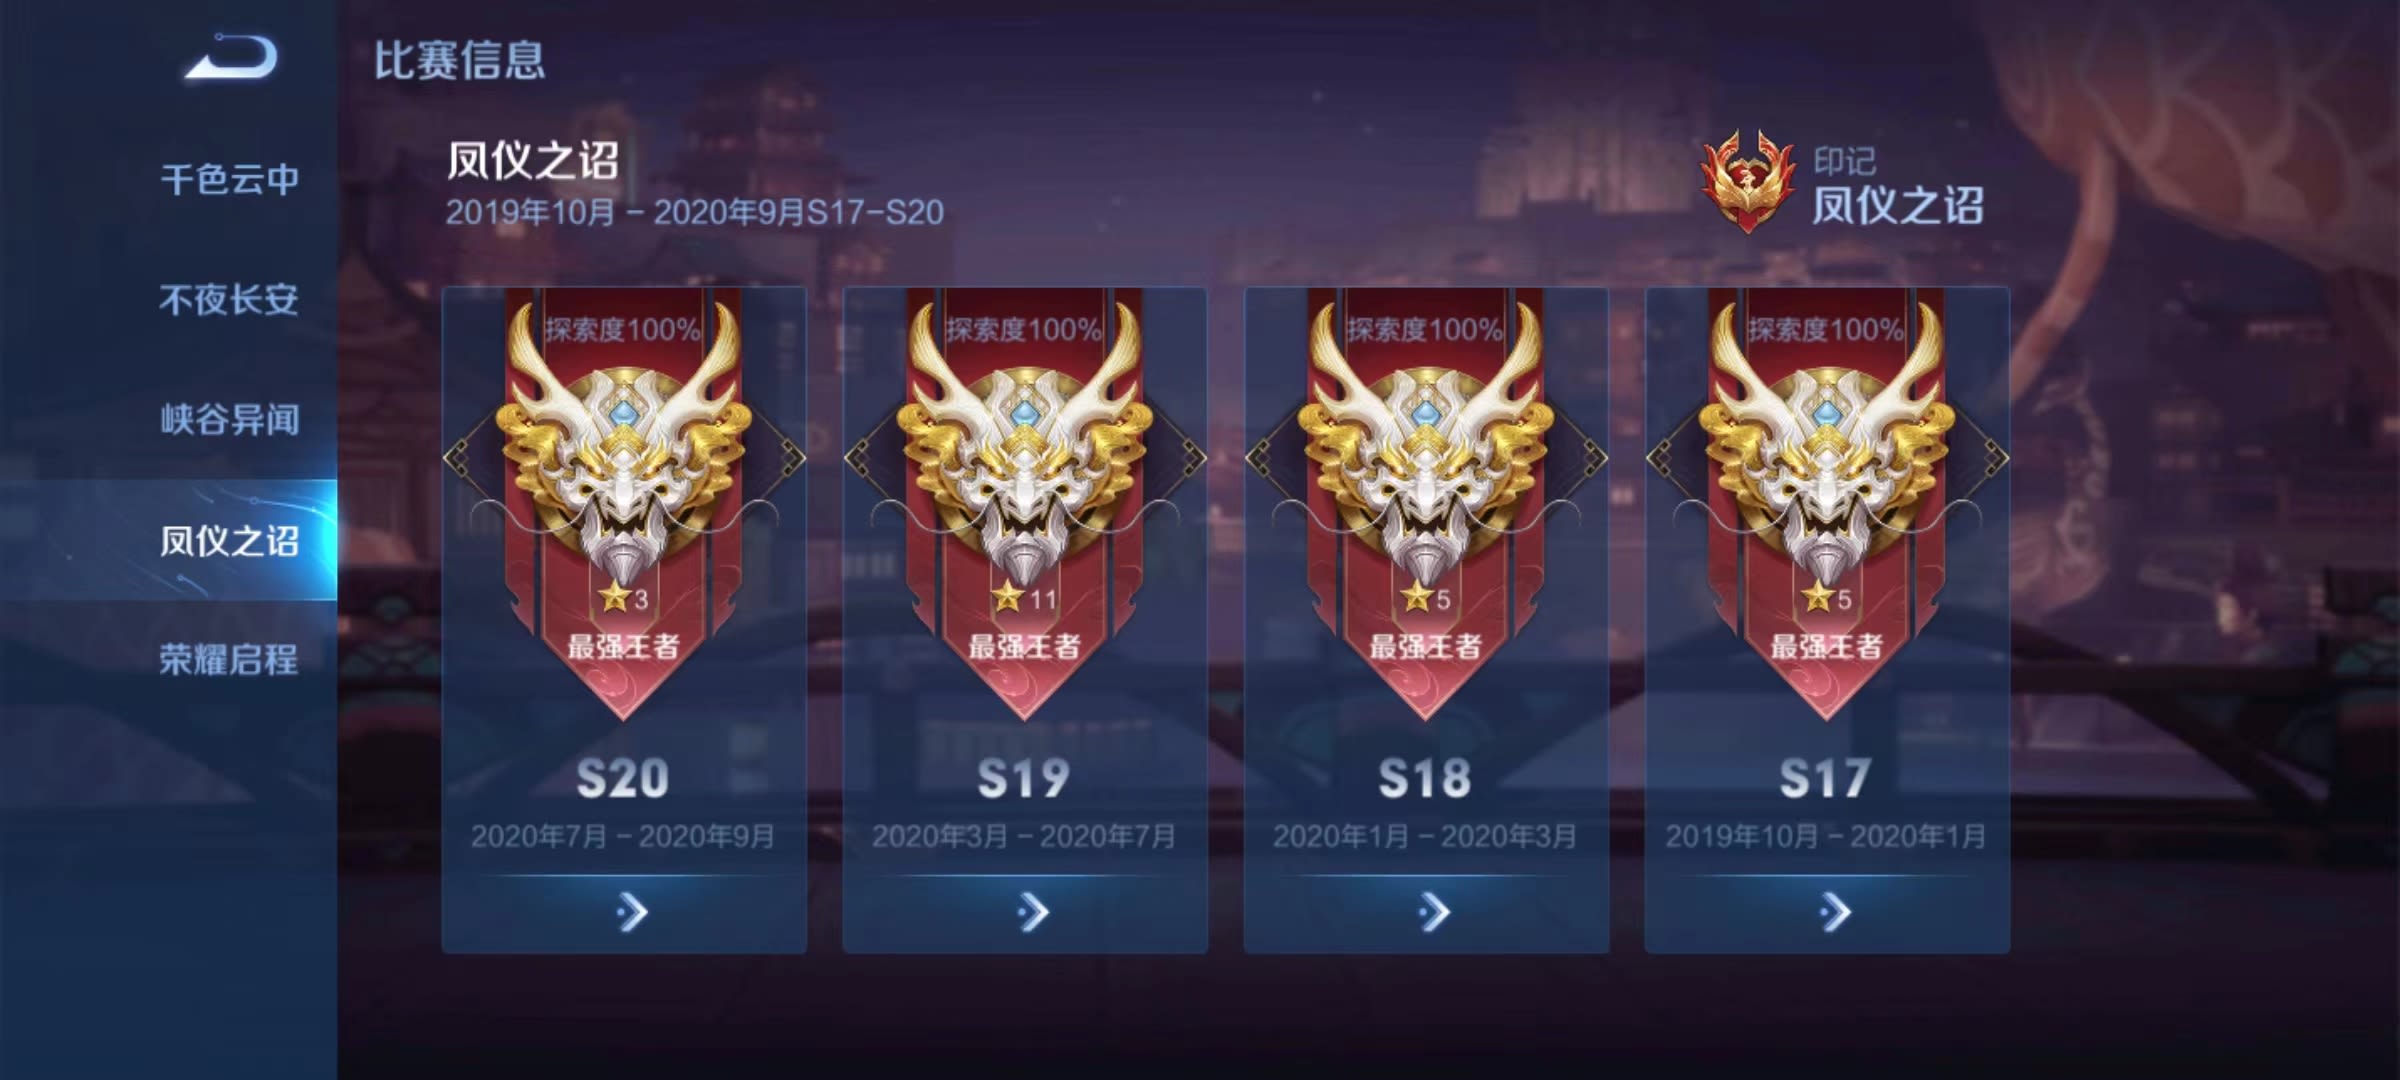 help you reach the higher rank in honor of kings